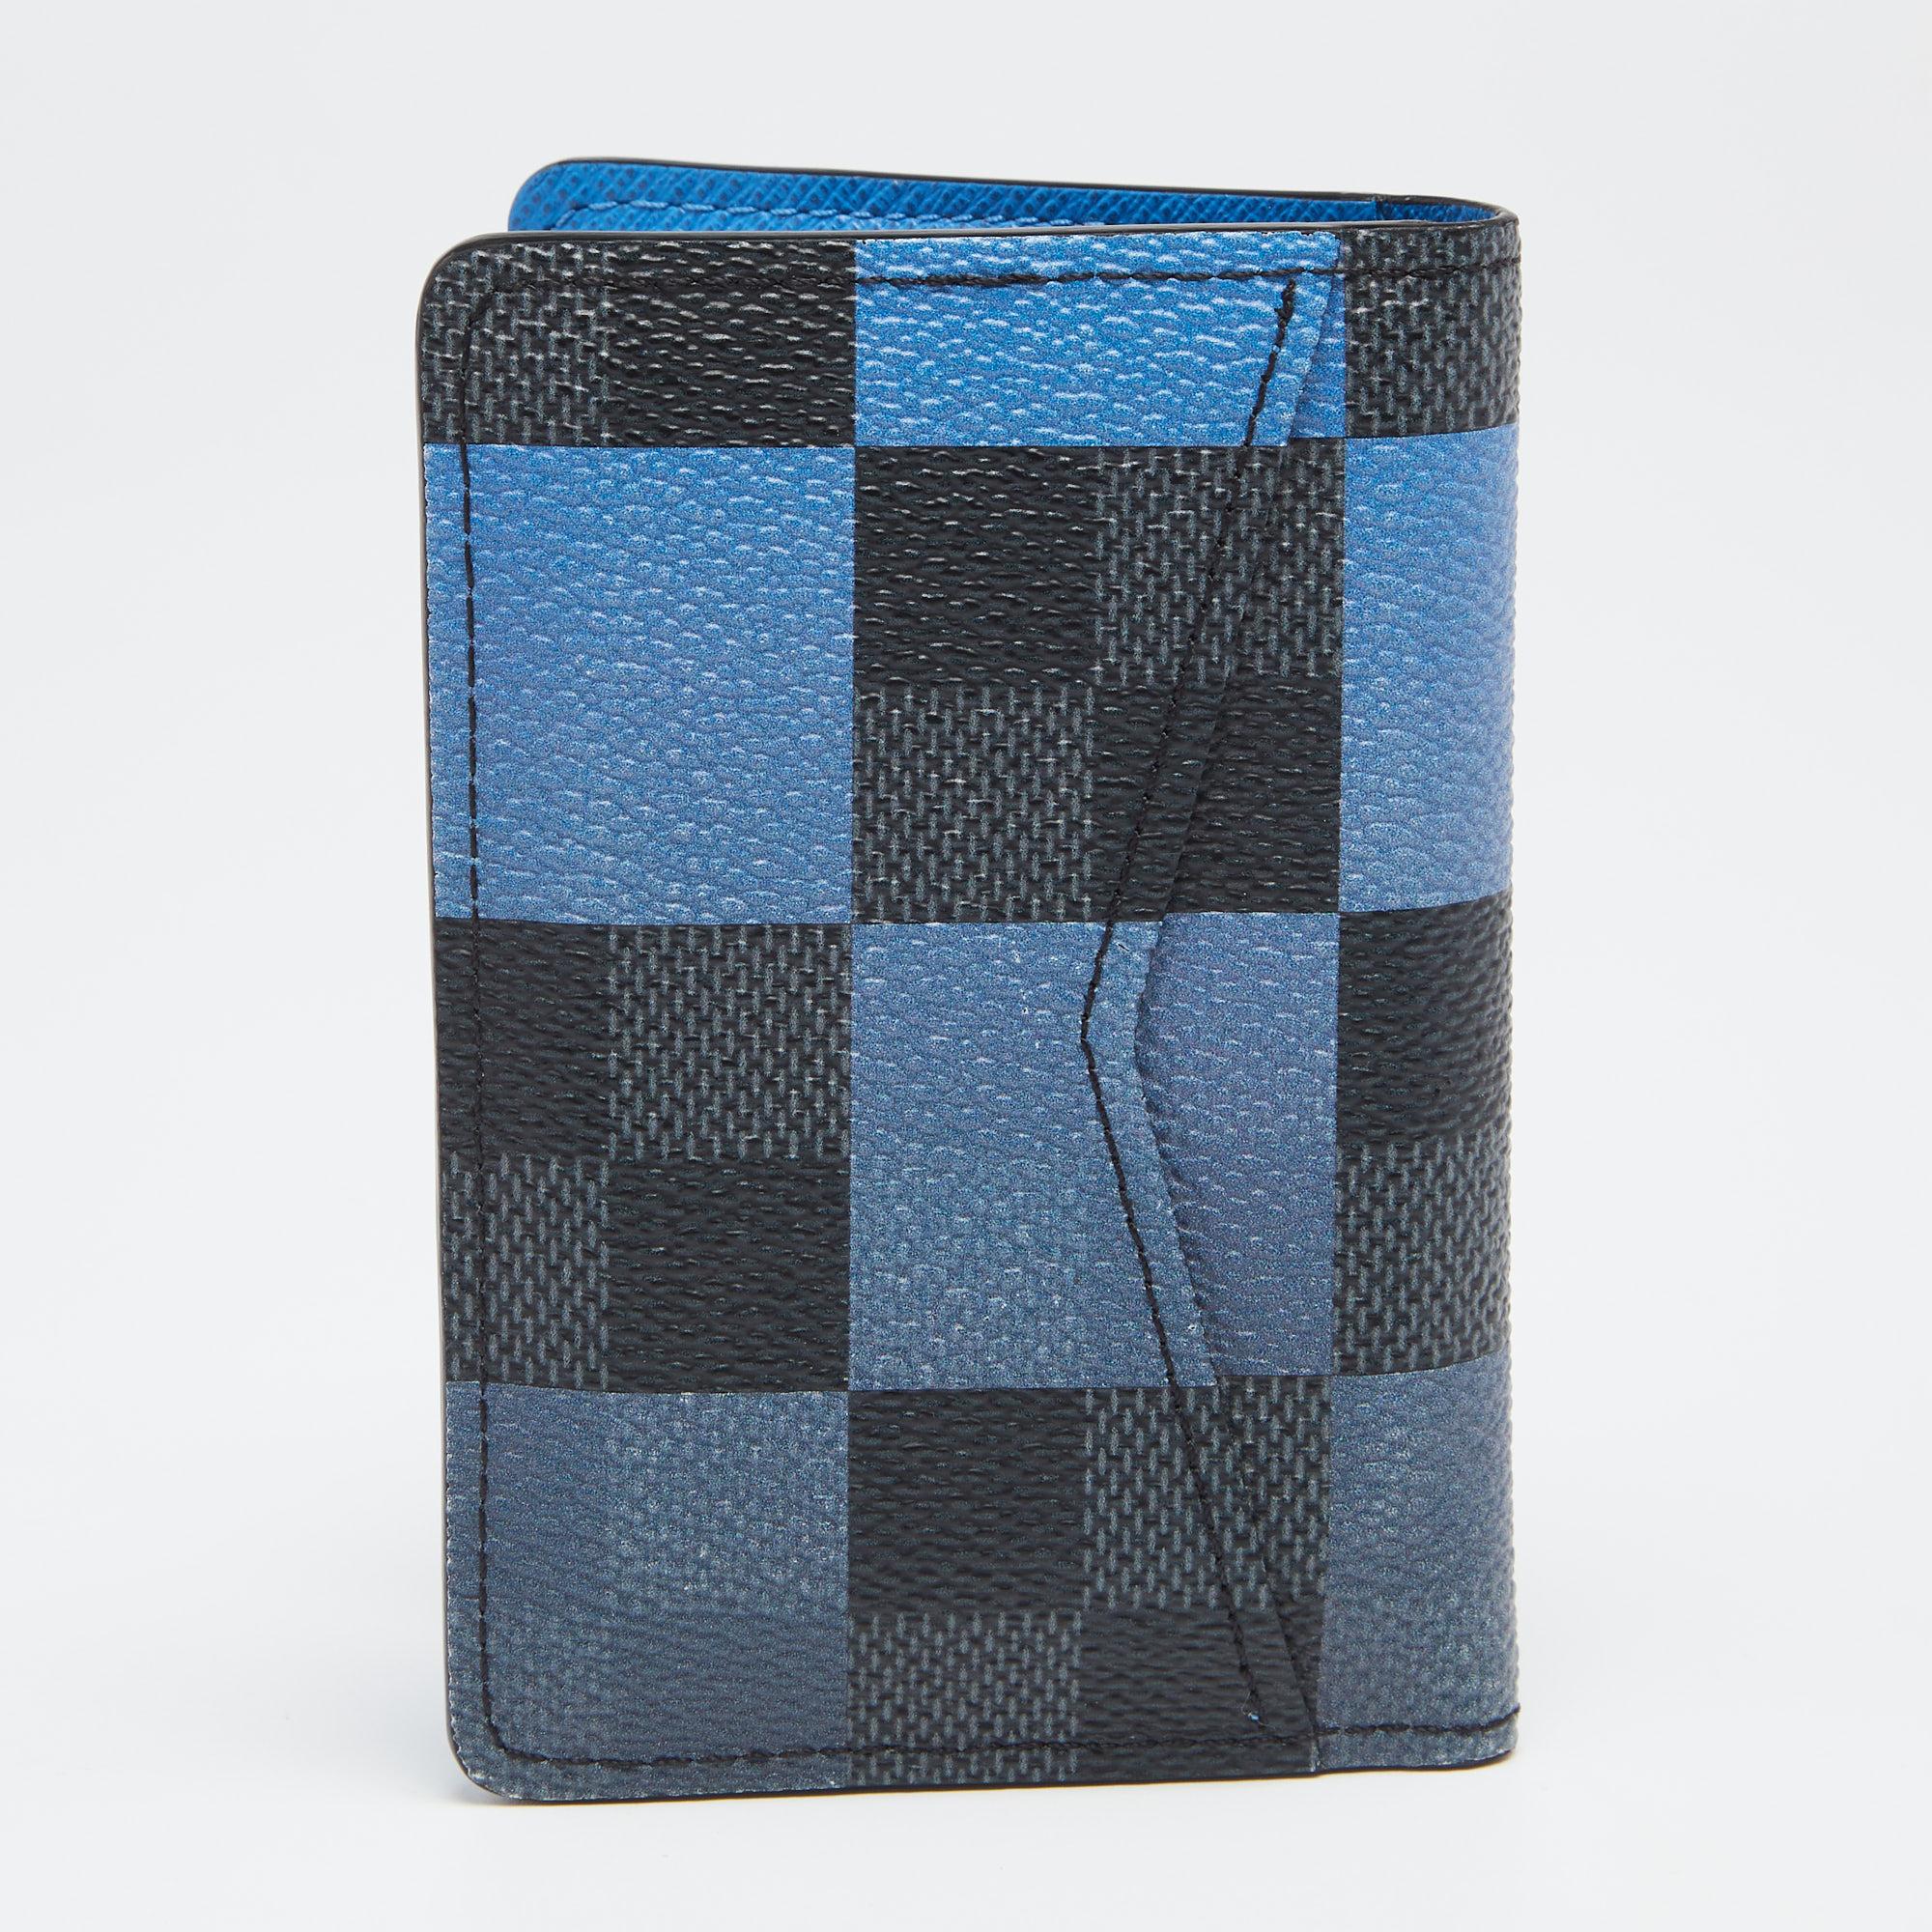 Designed to easily fit into your pockets and made from coated canvas with a touch of luxurious style, this blue pocket organizer from Louis Vuitton is a fine combination of practicality and high fashion.

Includes: Original Dustbag, Original Box